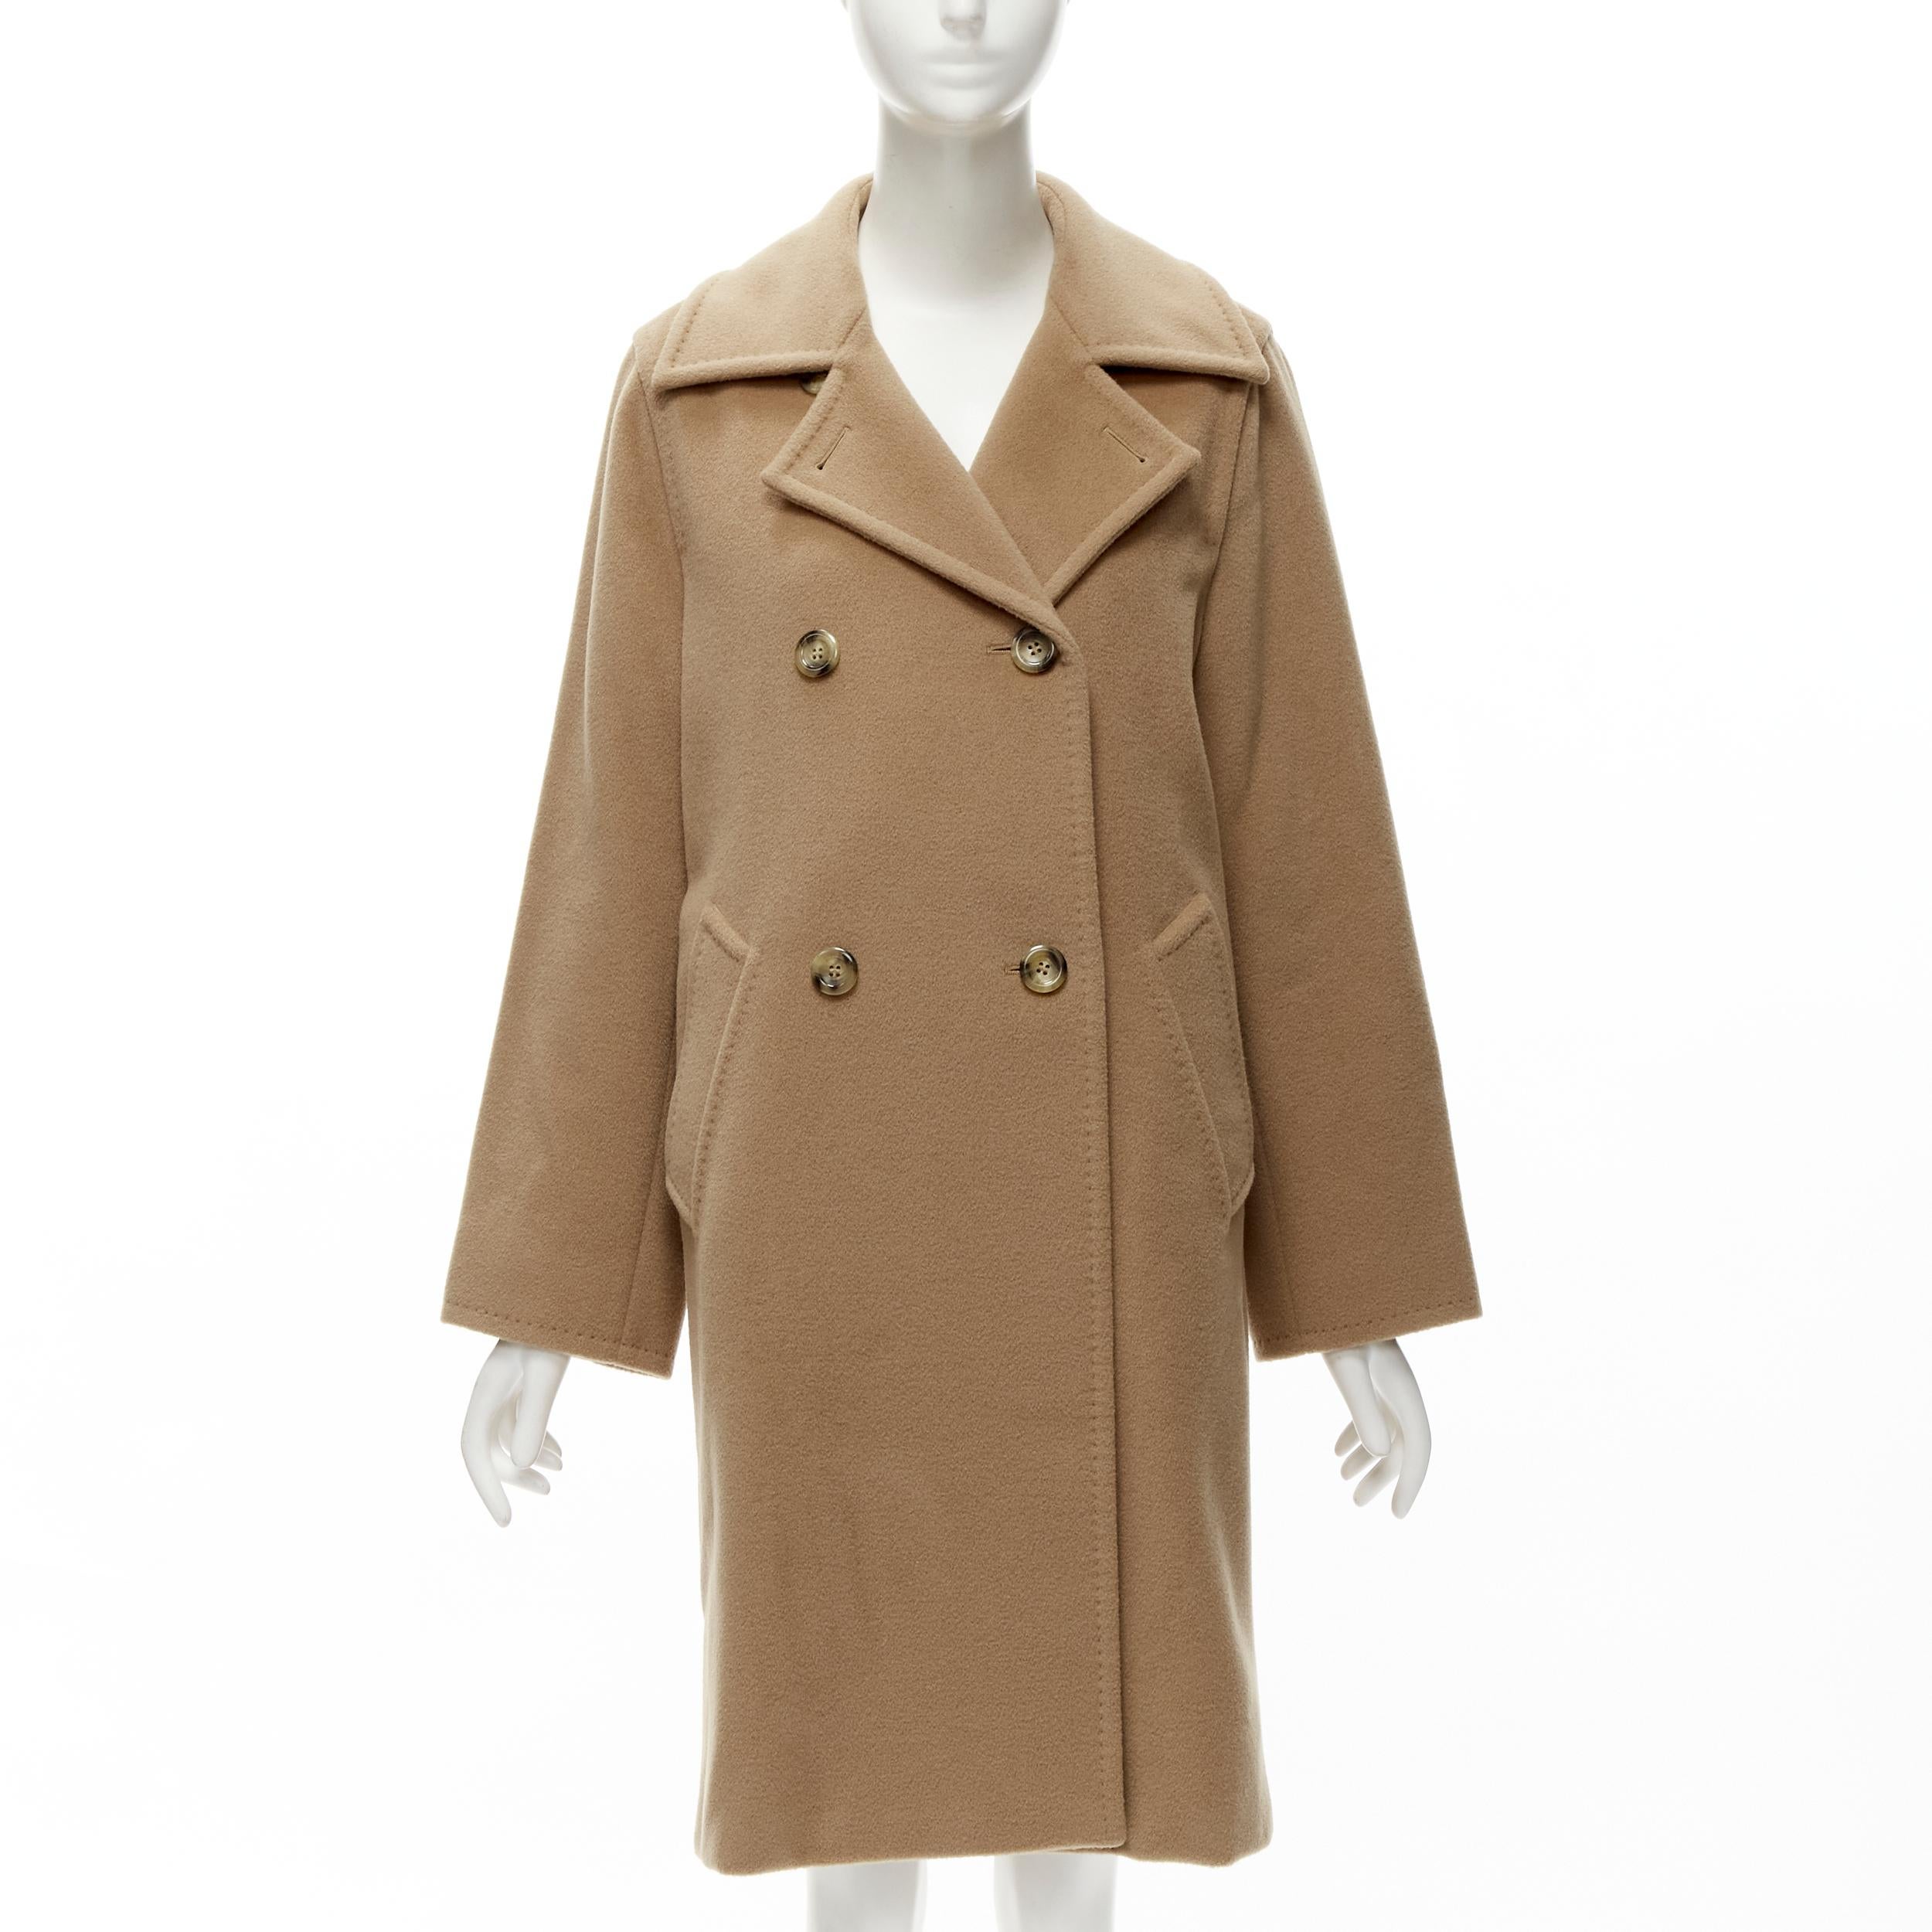 MAX MARA wool camel brown shell button longline overcoat jacket FR36
Reference: TGAS/C01729
Brand: Max Mara
Material: Virgin Wool
Color: Camel
Pattern: Solid
Closure: Button
Lining: Fabric
Made in: Italy

CONDITION:
Condition: Excellent, this item